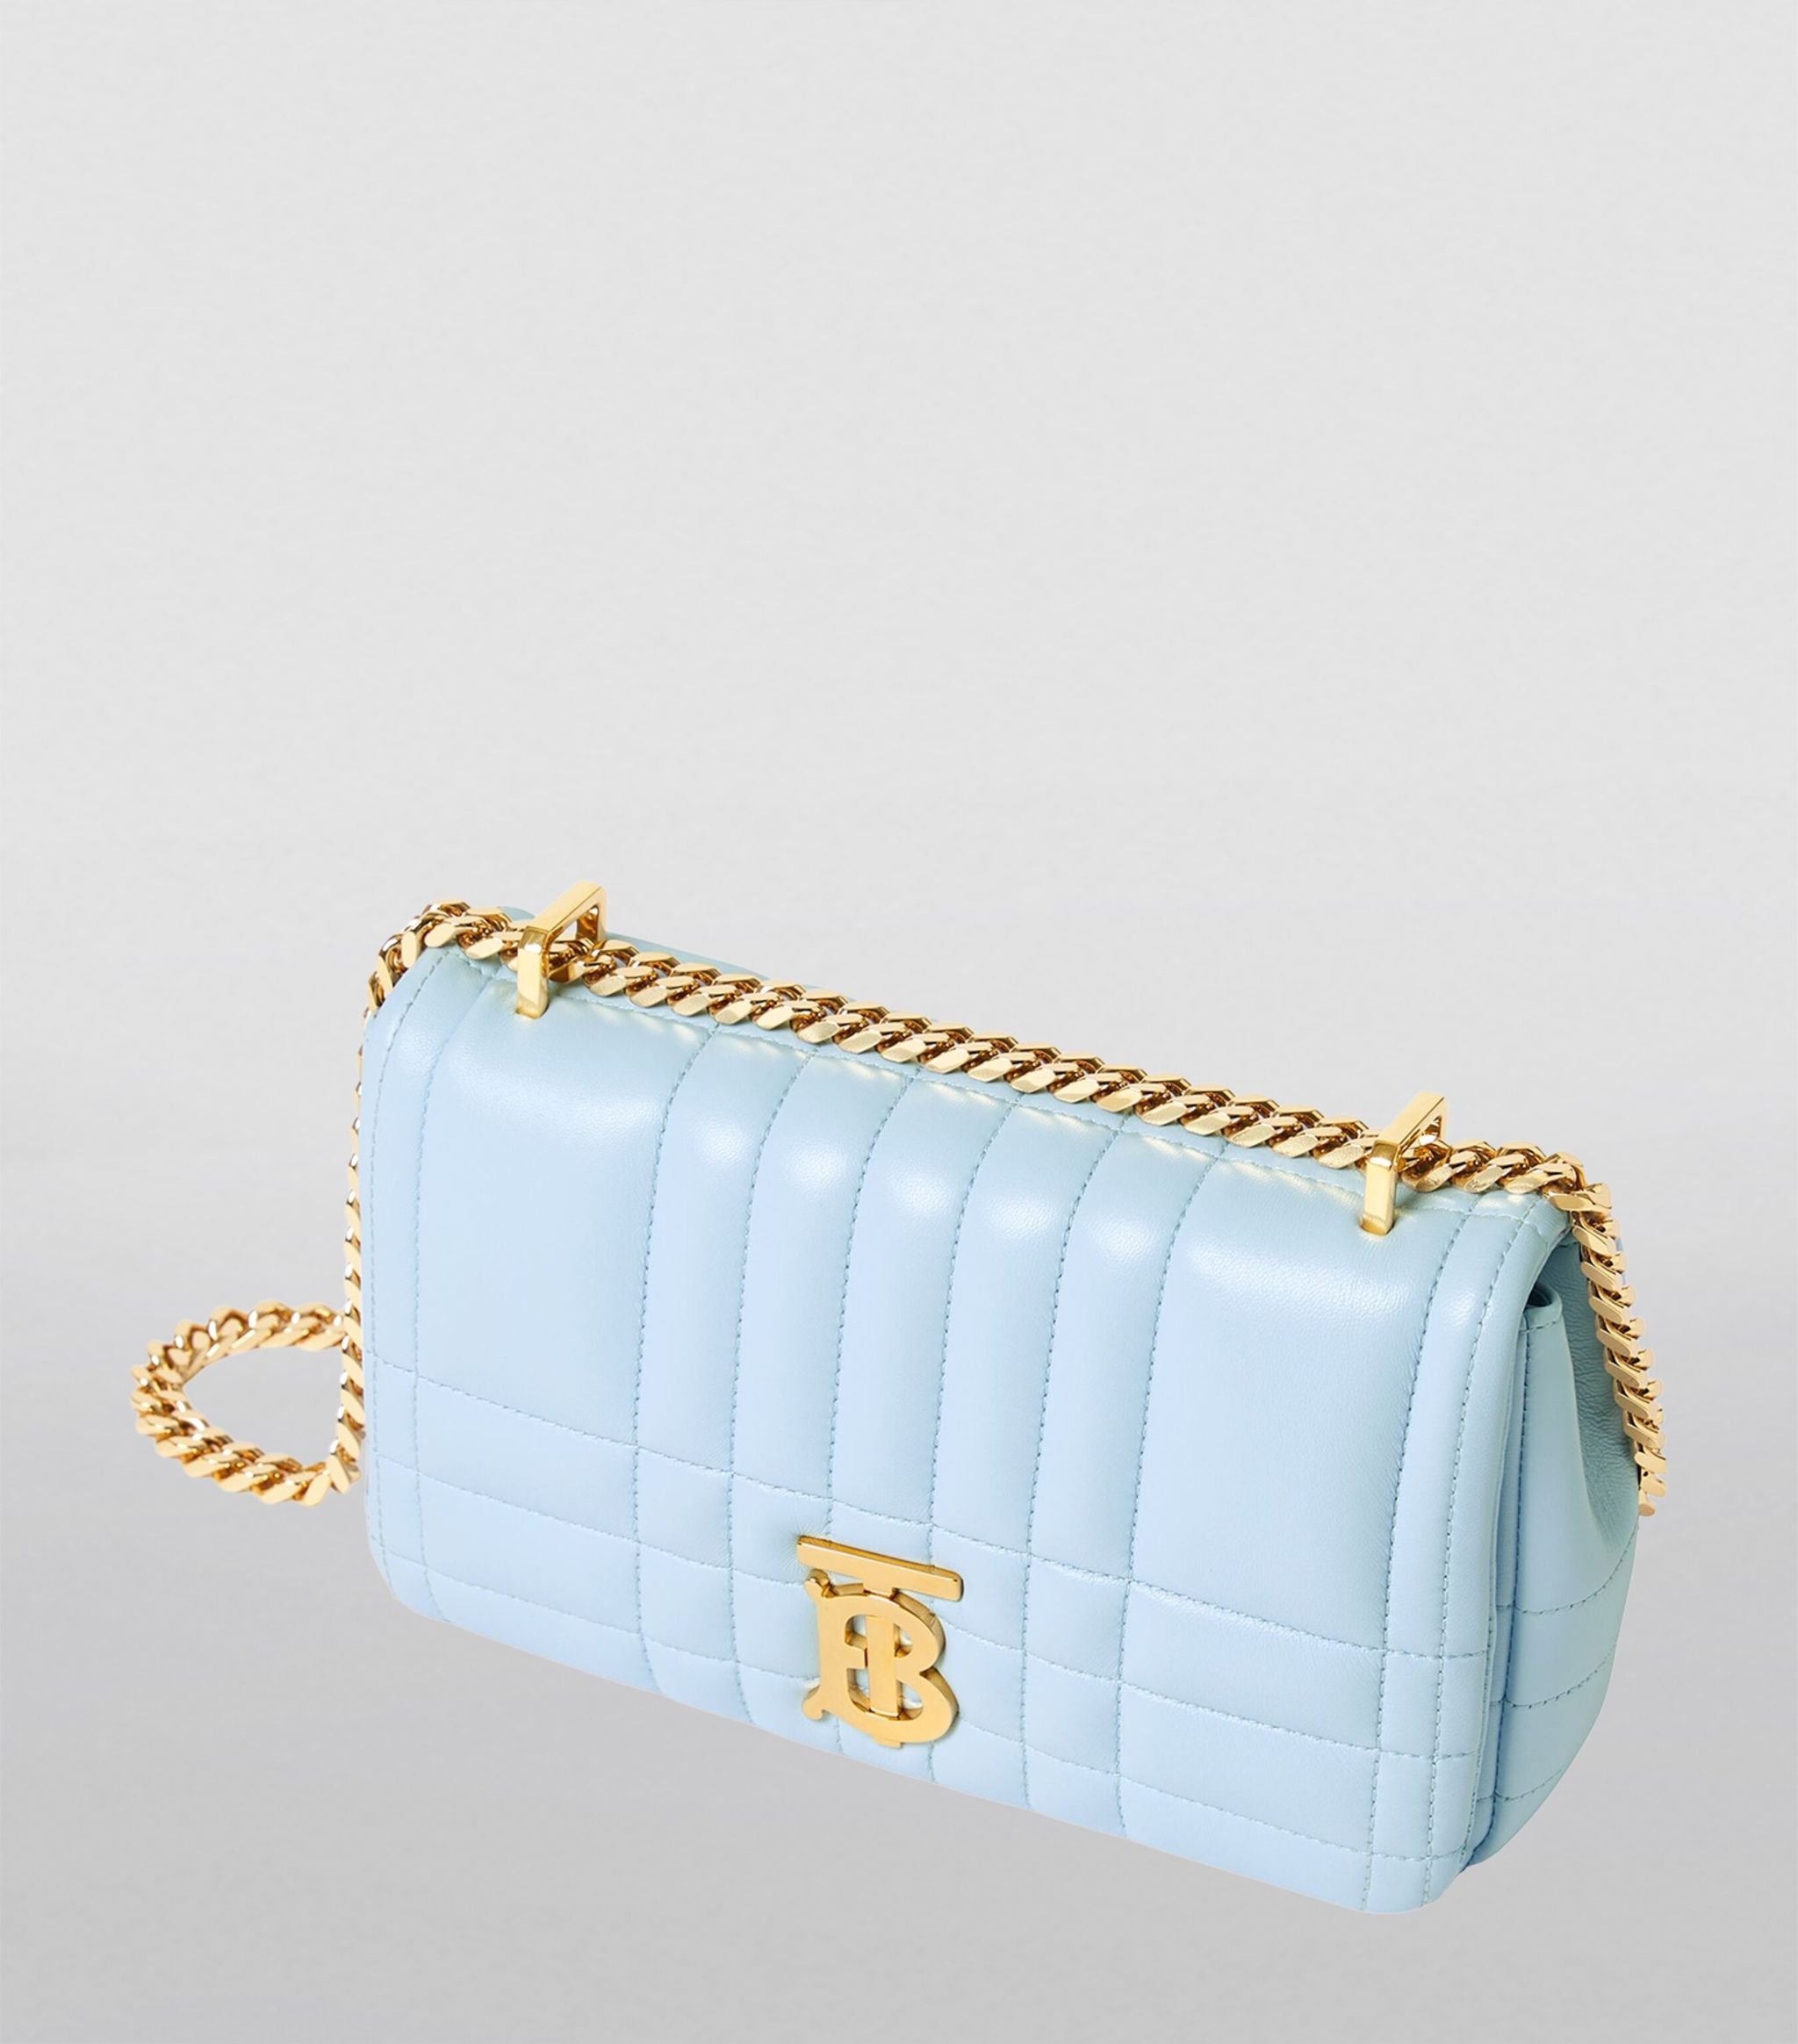 Burberry Lola Mini Quilted Cross-body Bag